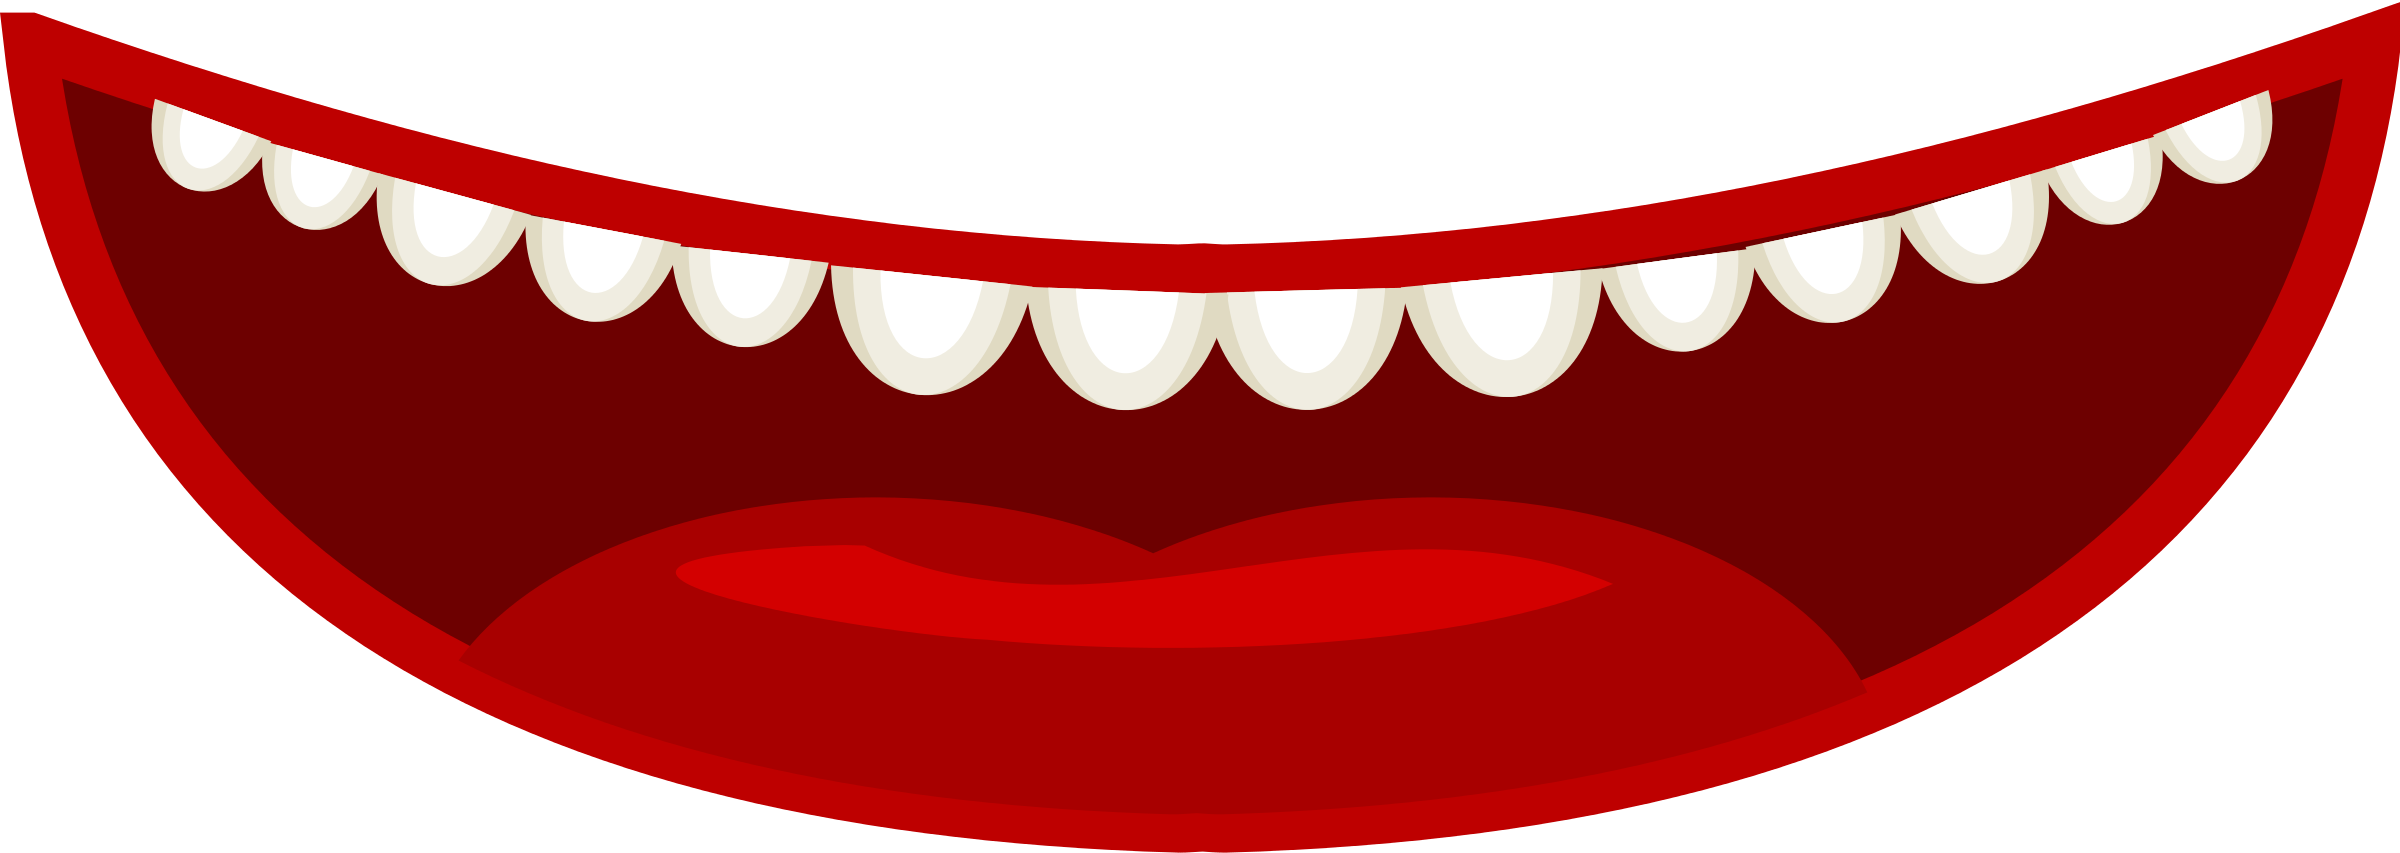 laughing mouth cartoon